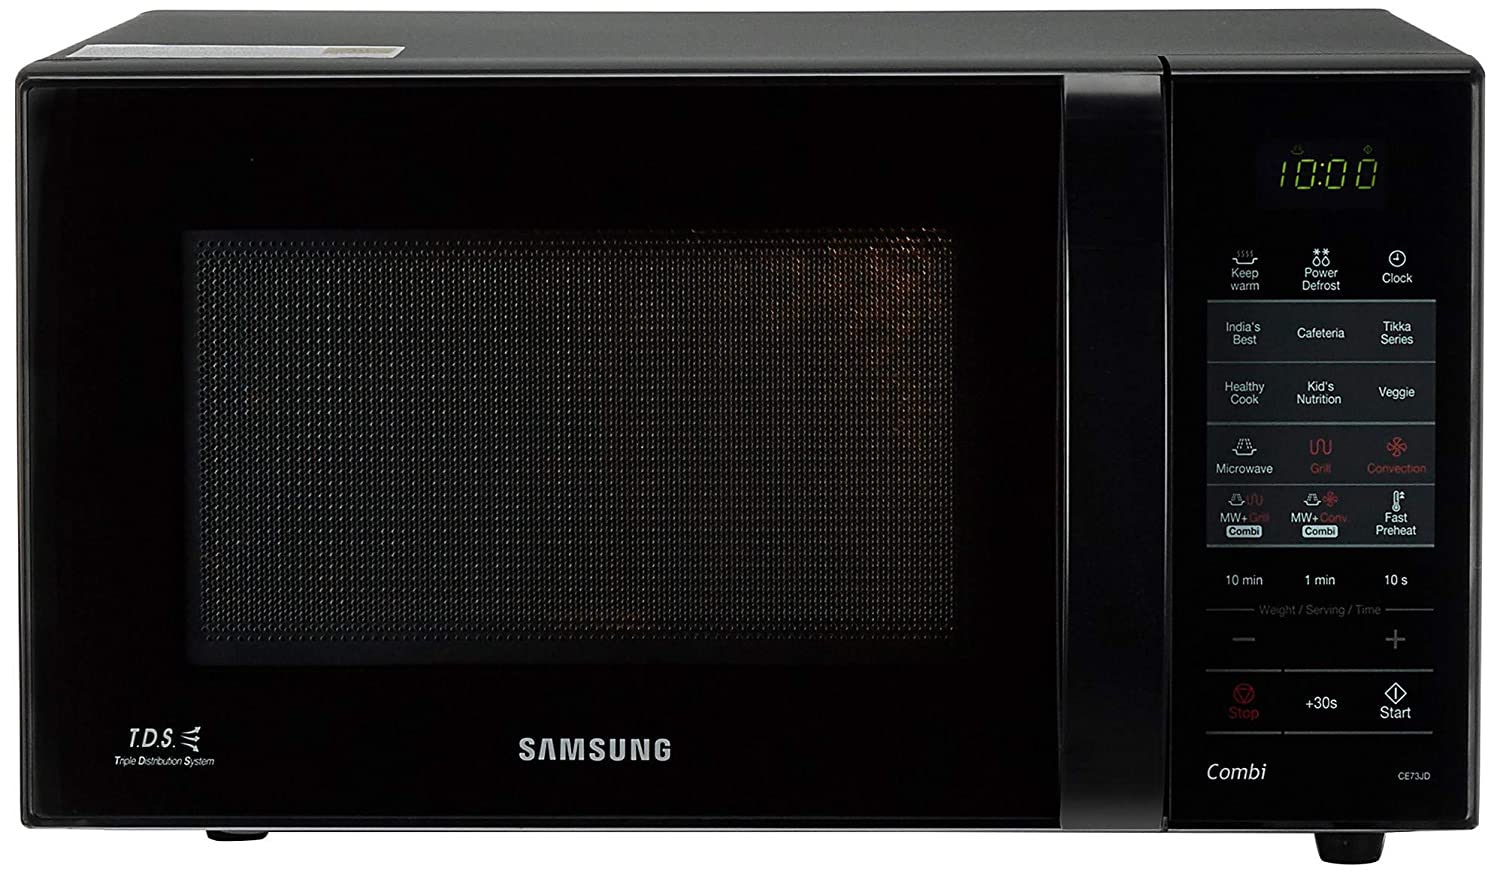 Best Samsung Convection Microwave Oven